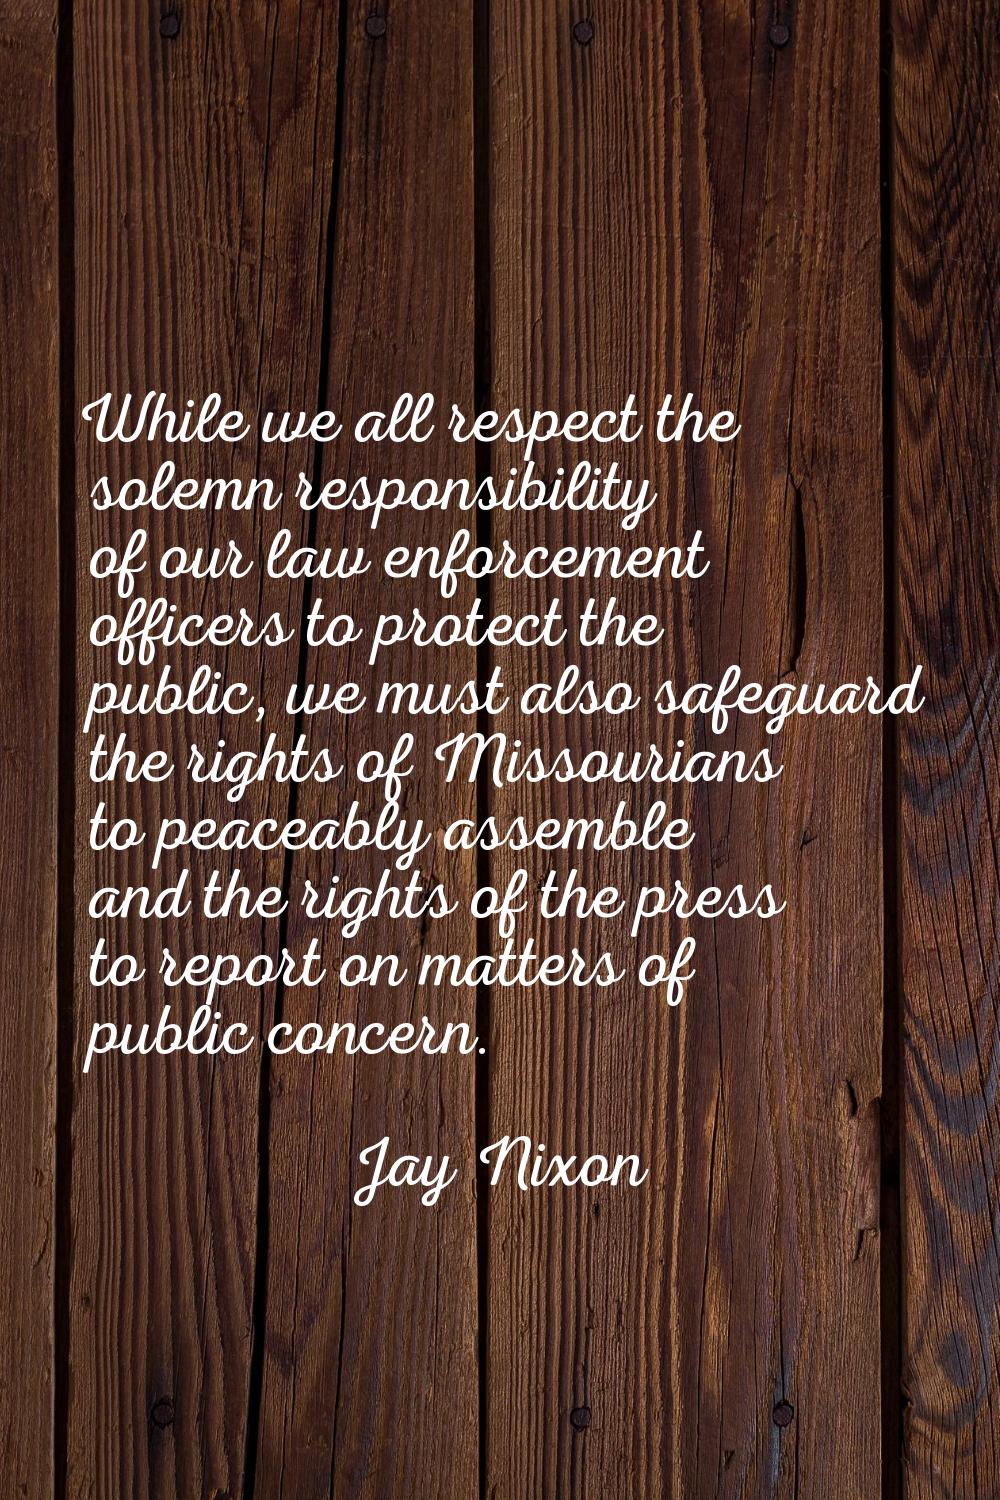 While we all respect the solemn responsibility of our law enforcement officers to protect the publi